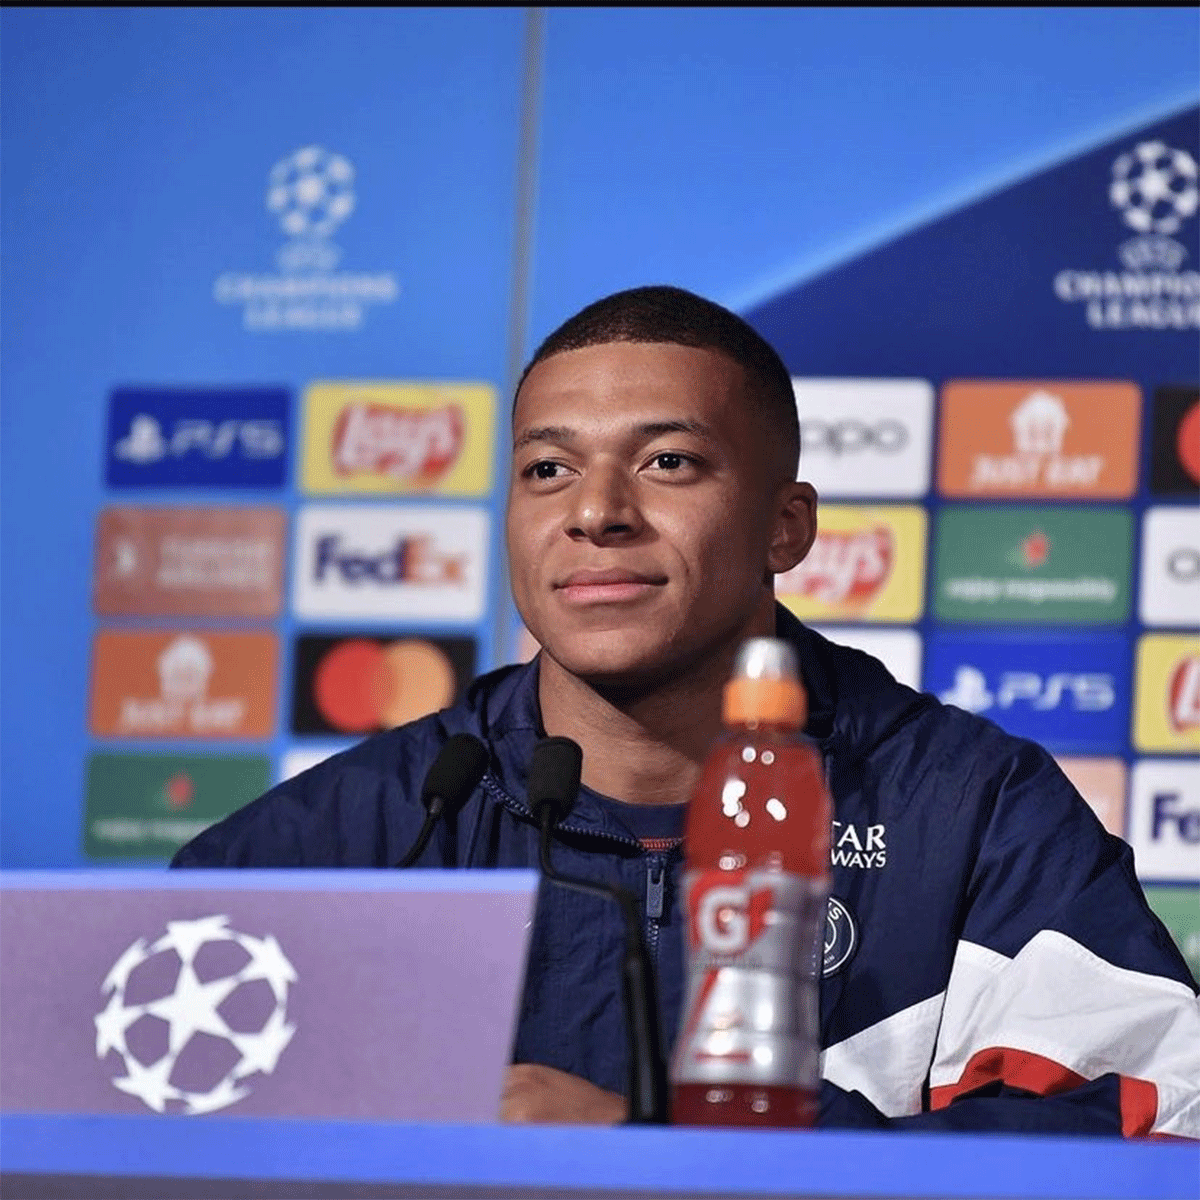 Paris St Germain striker Kylian Mbappe is in the middle of a controversy over playing down a question about PSG's trip to Nantes by a private jet